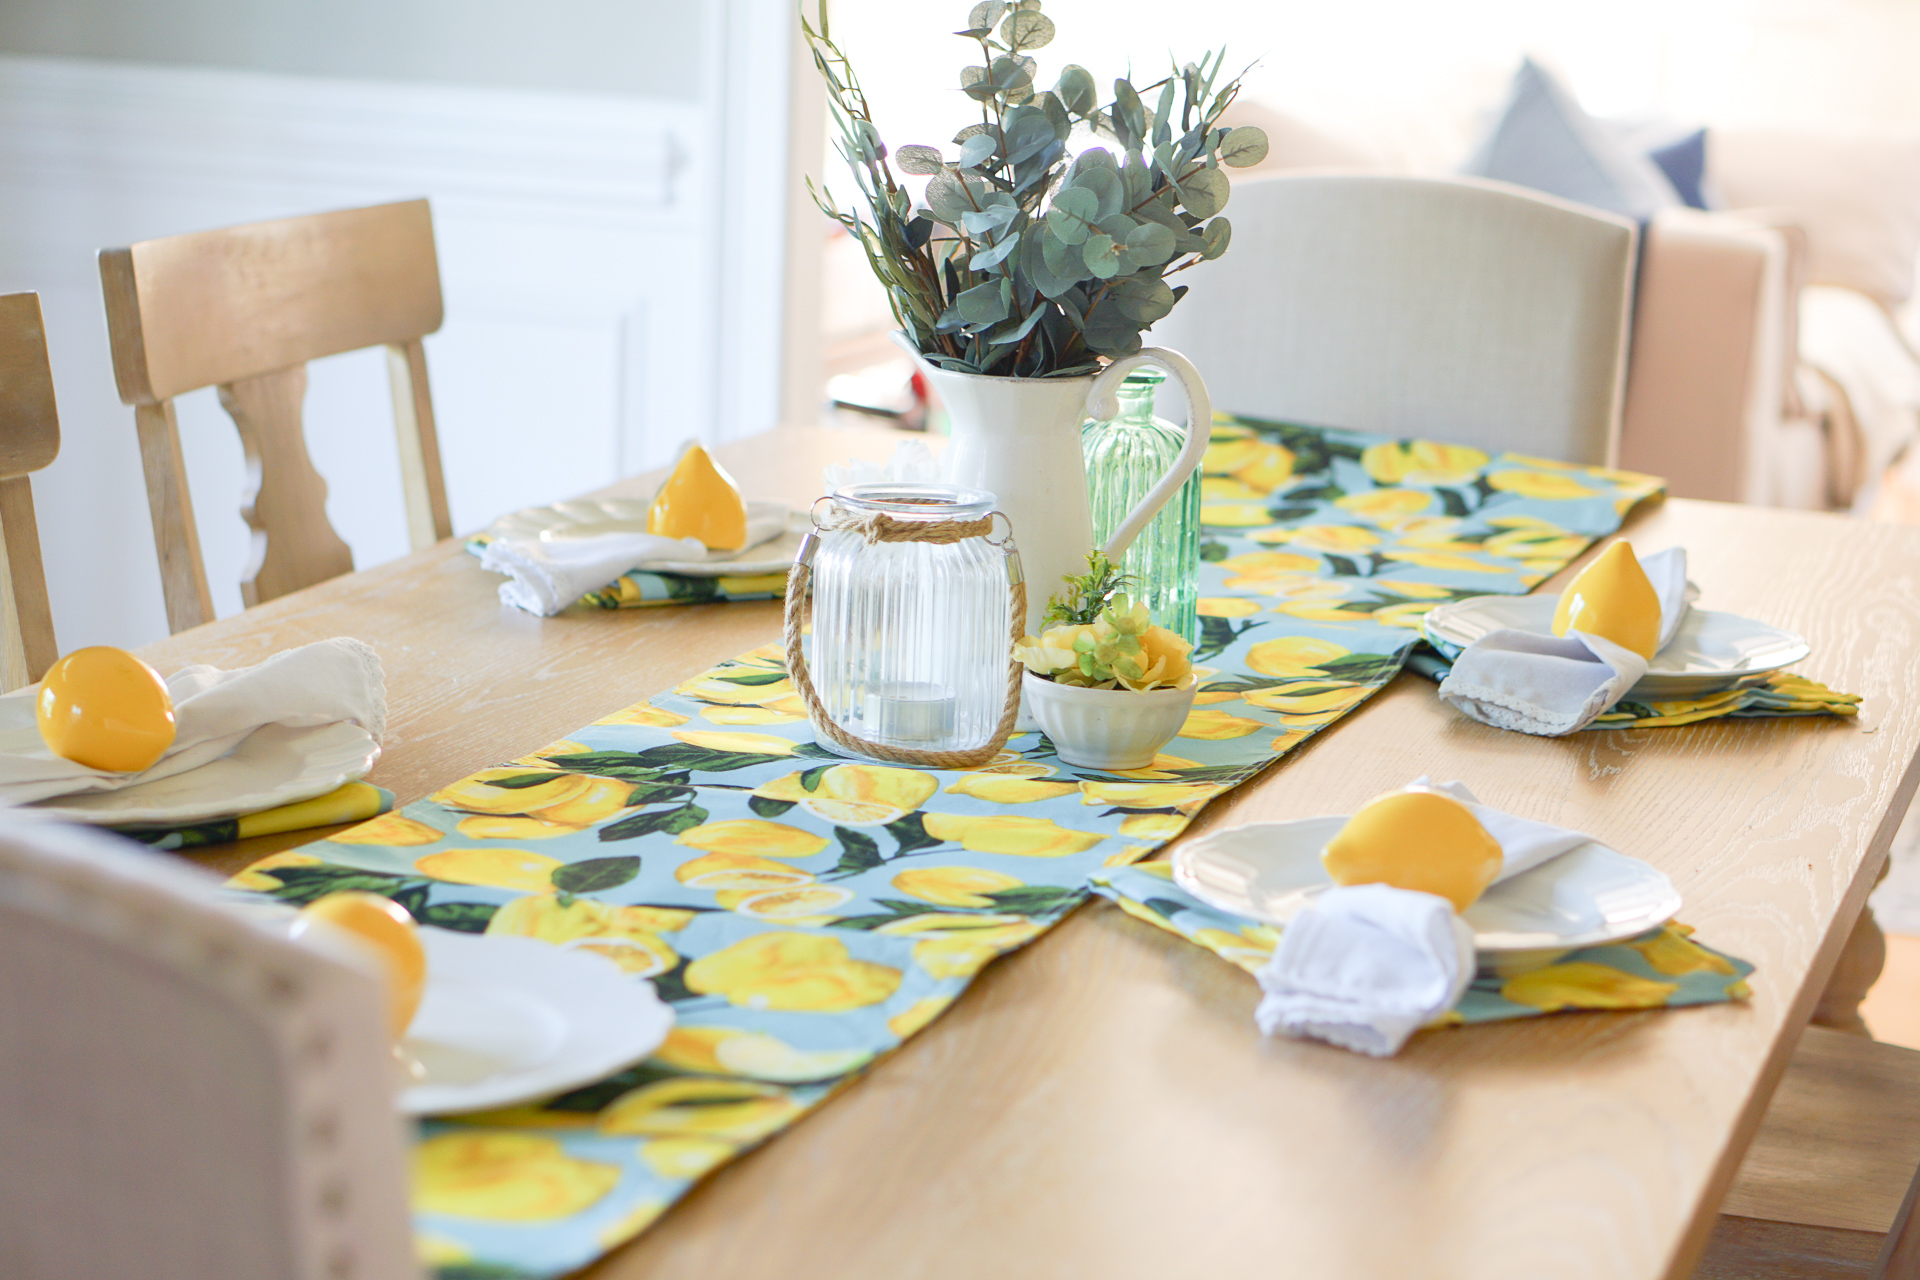 How to Create a Stunning Summer Tablescape - Home Decor Ideas and Dining Table DIY 